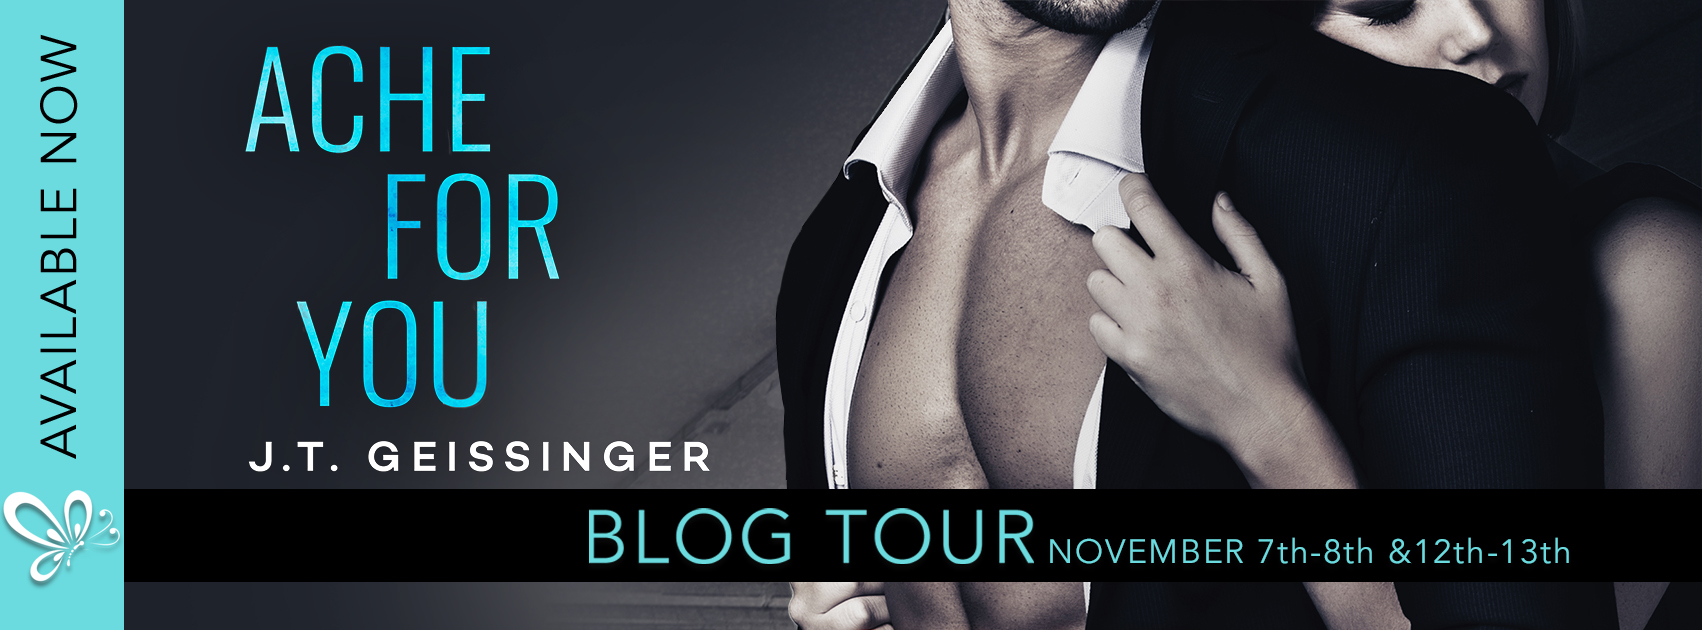 Ache for You by J.T. Geissinger Blog Tour Review